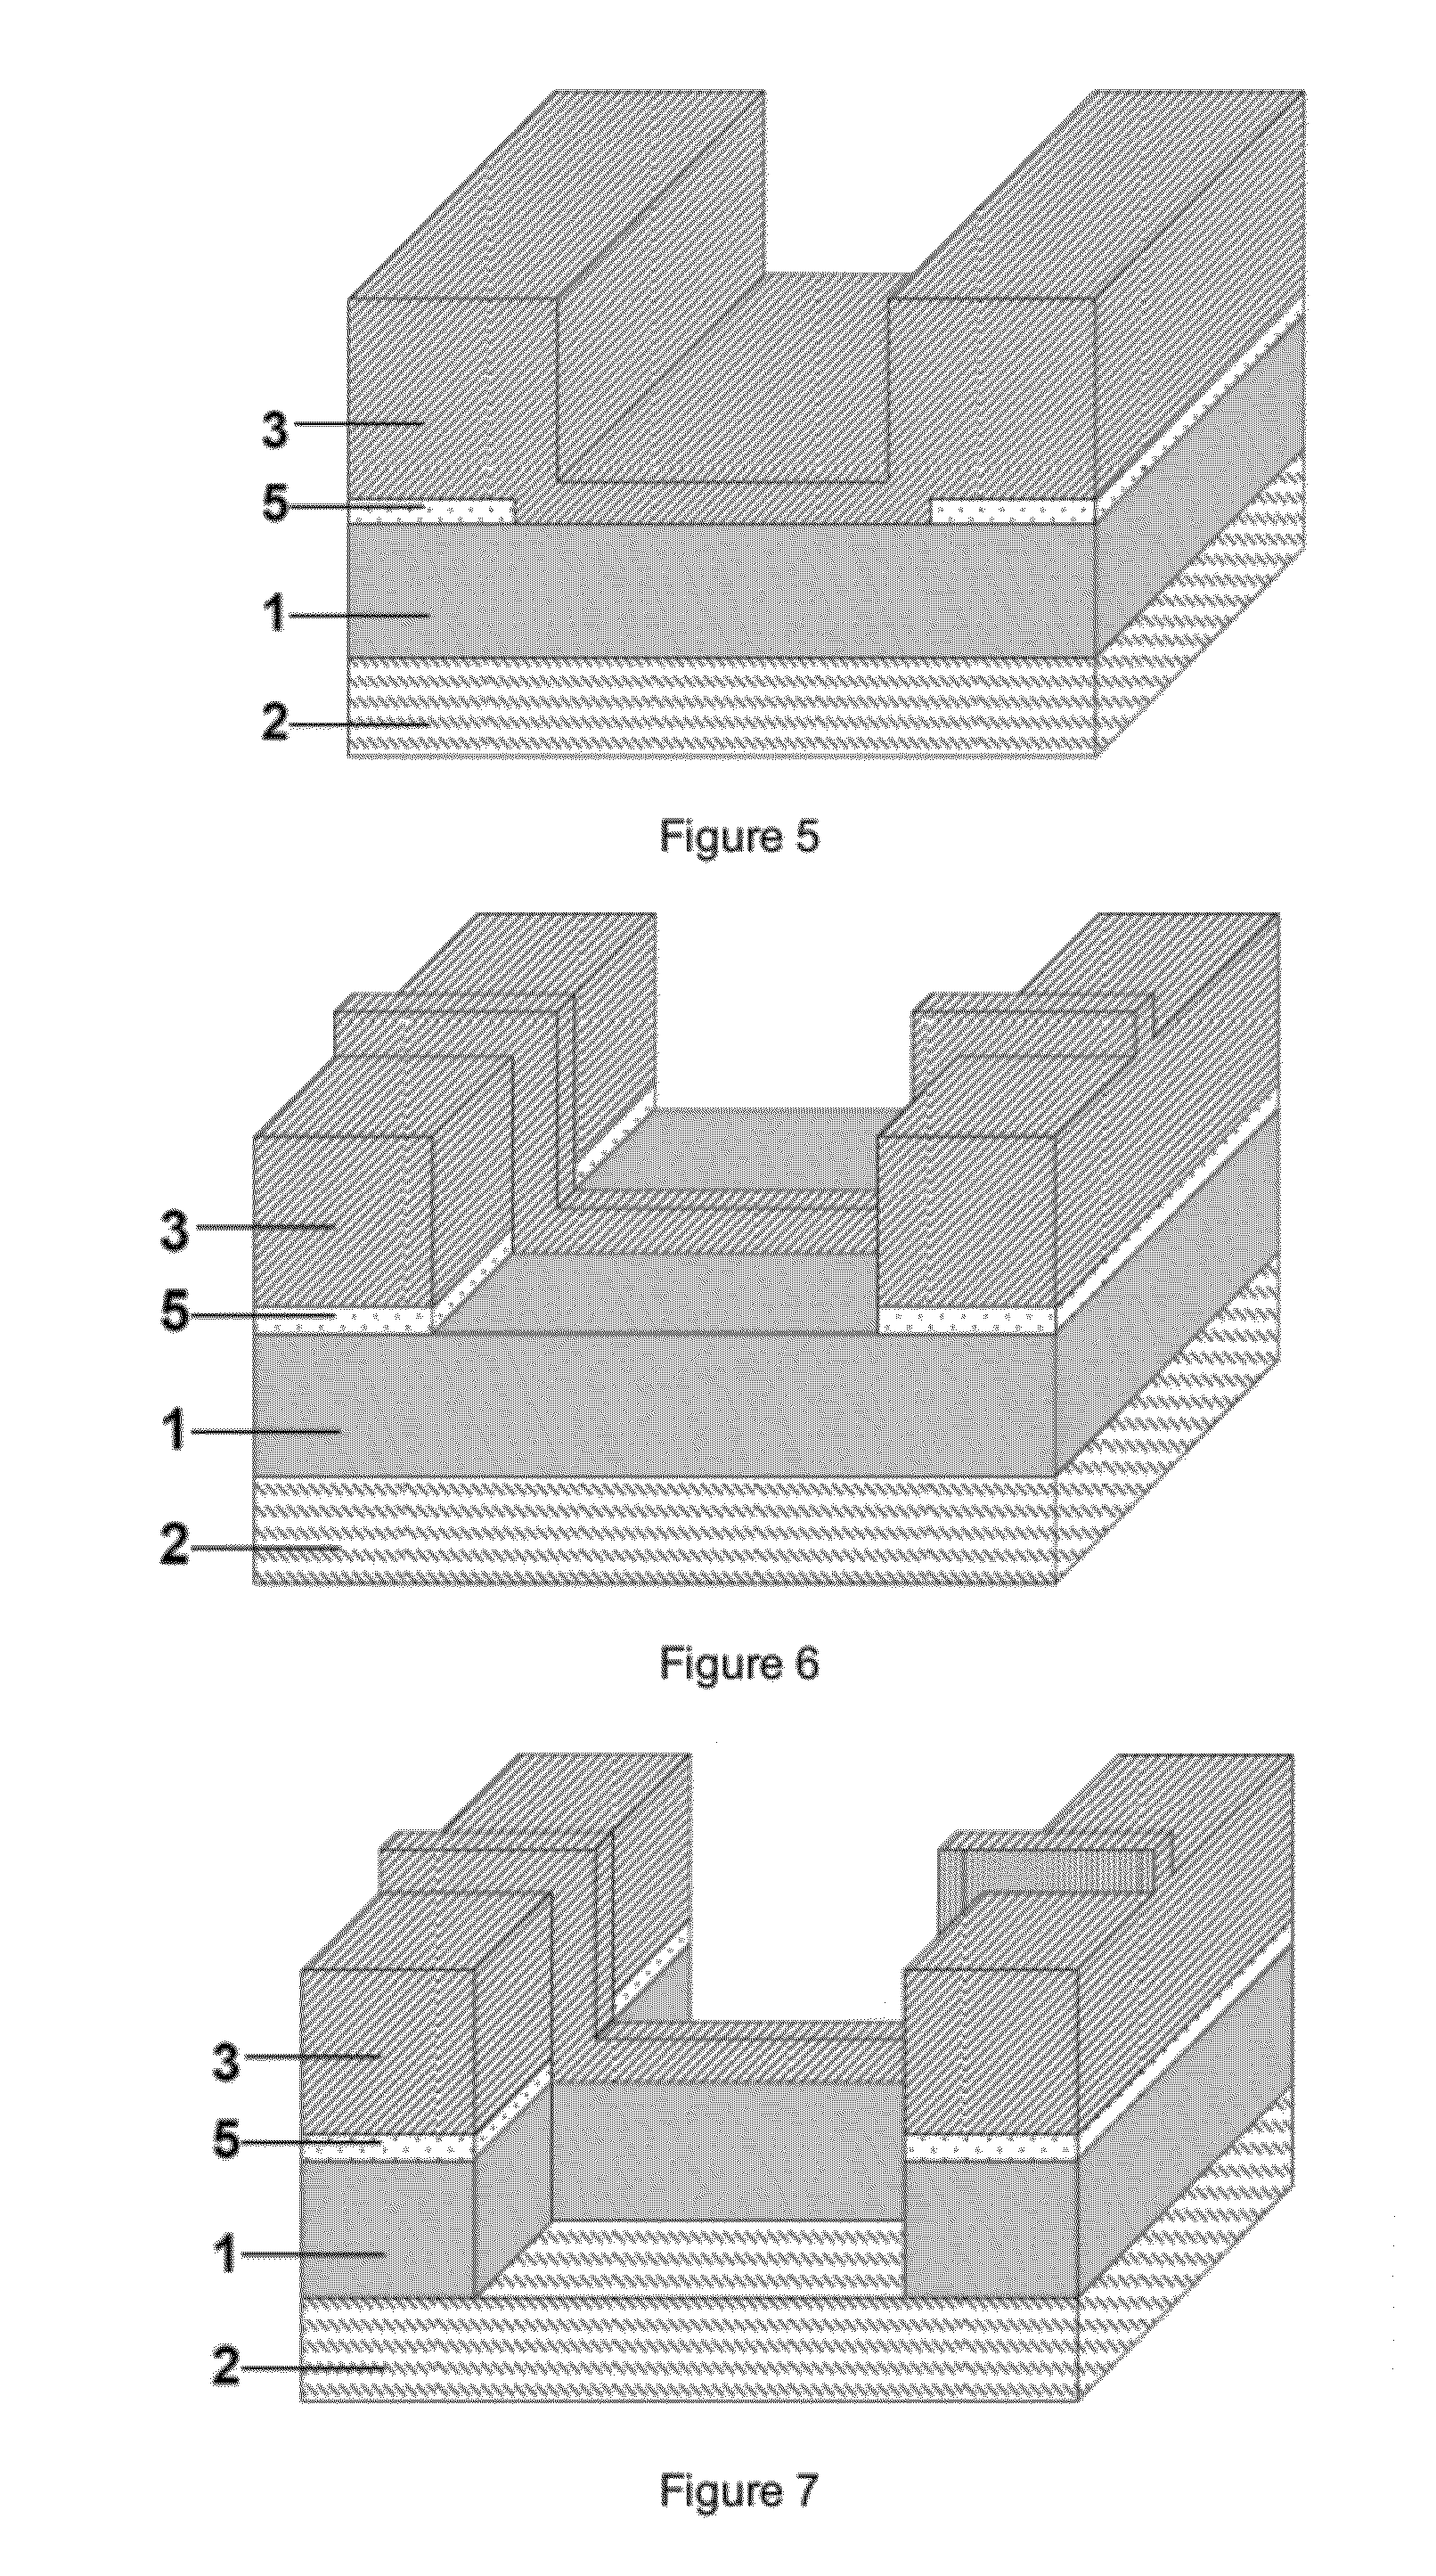 Method for fabricating surrounding-gate silicon nanowire transistor with air sidewalls